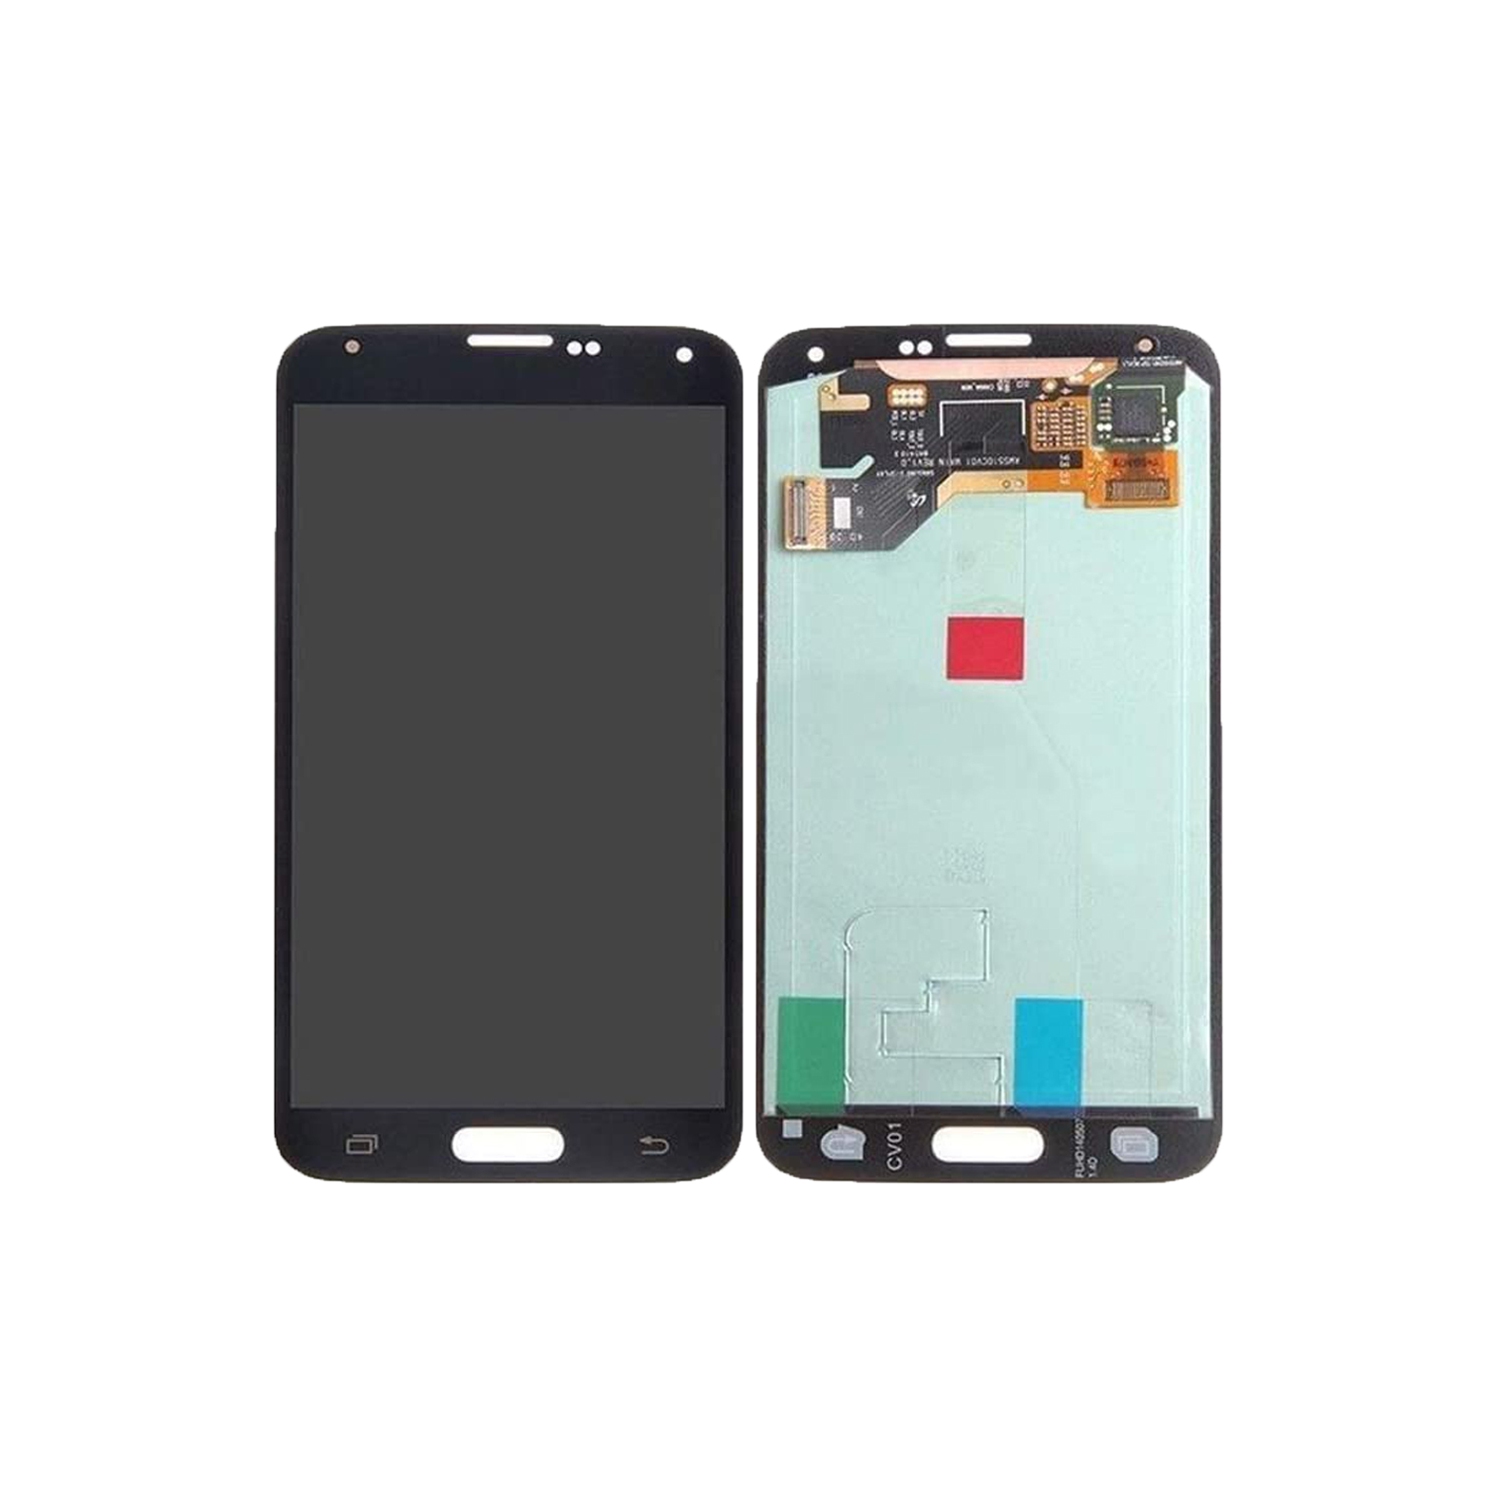 Replacement LCD Display Touch Screen Digitizer Assembly Without Home Button For Samsung Galaxy S5 - Black